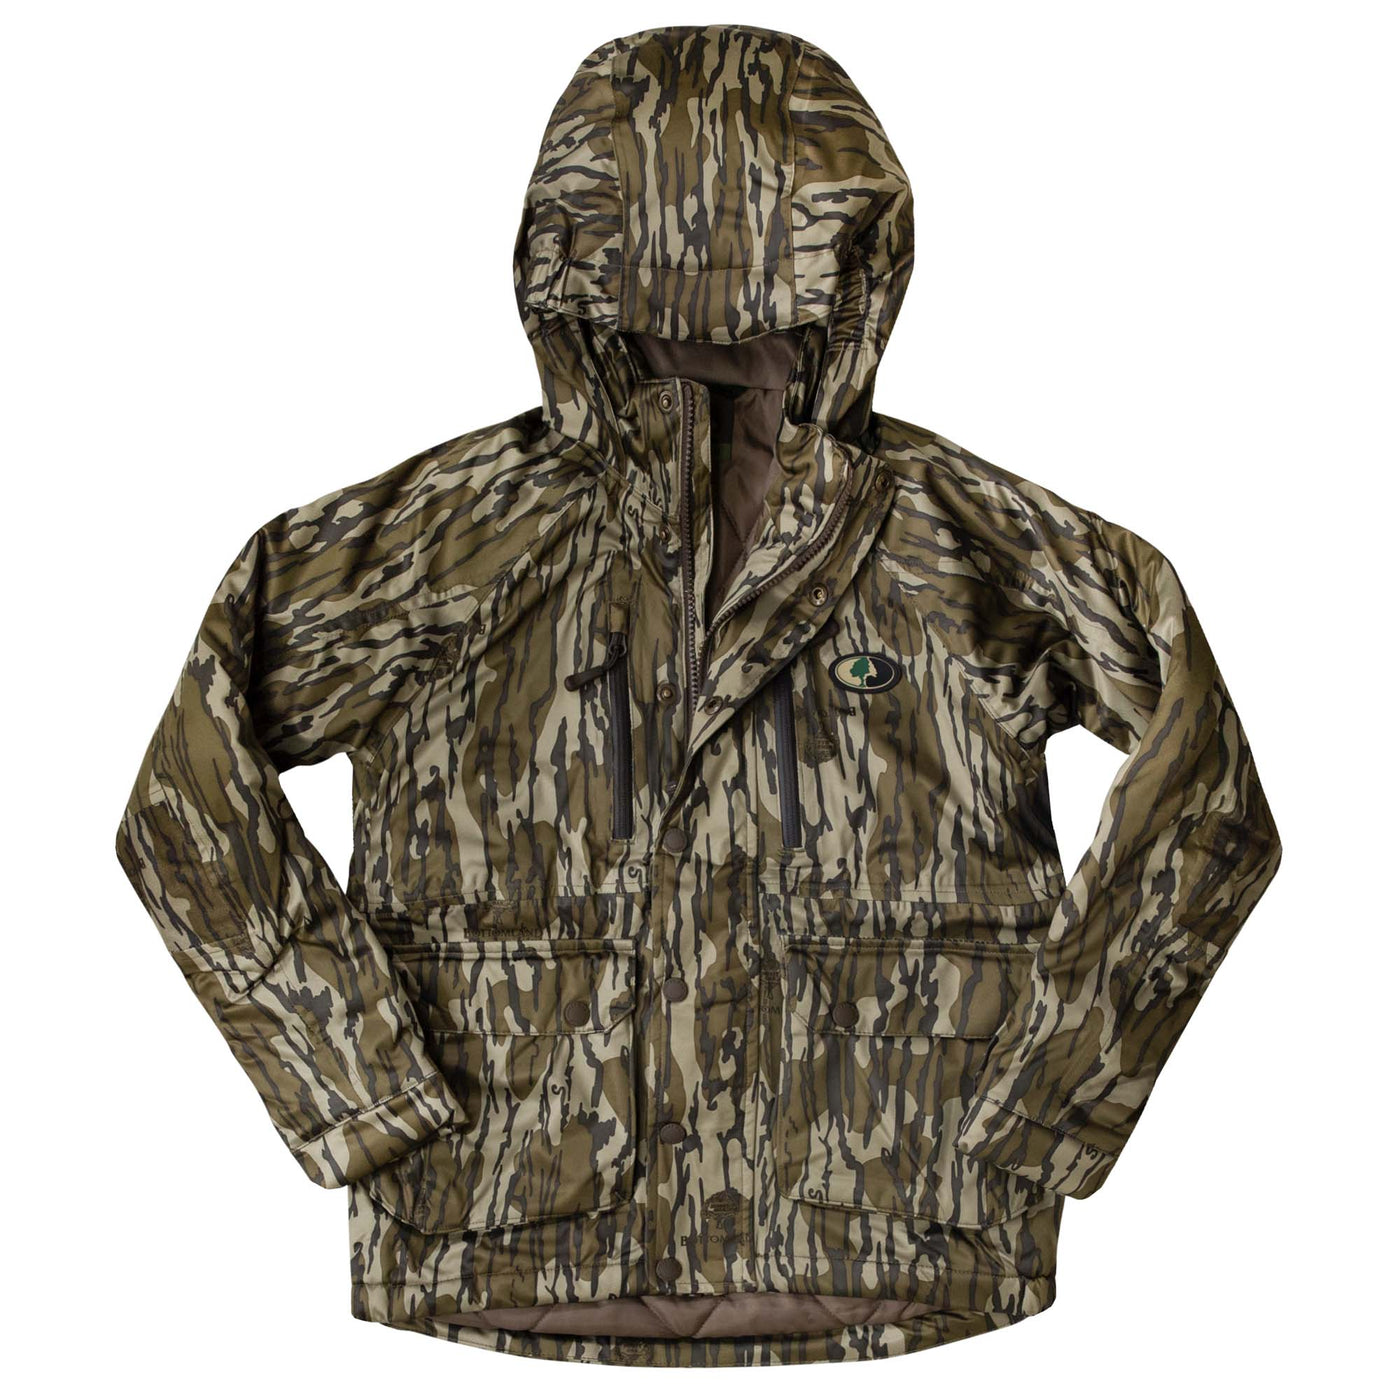 Mossy Oak Youth WPB Insulated Jacket